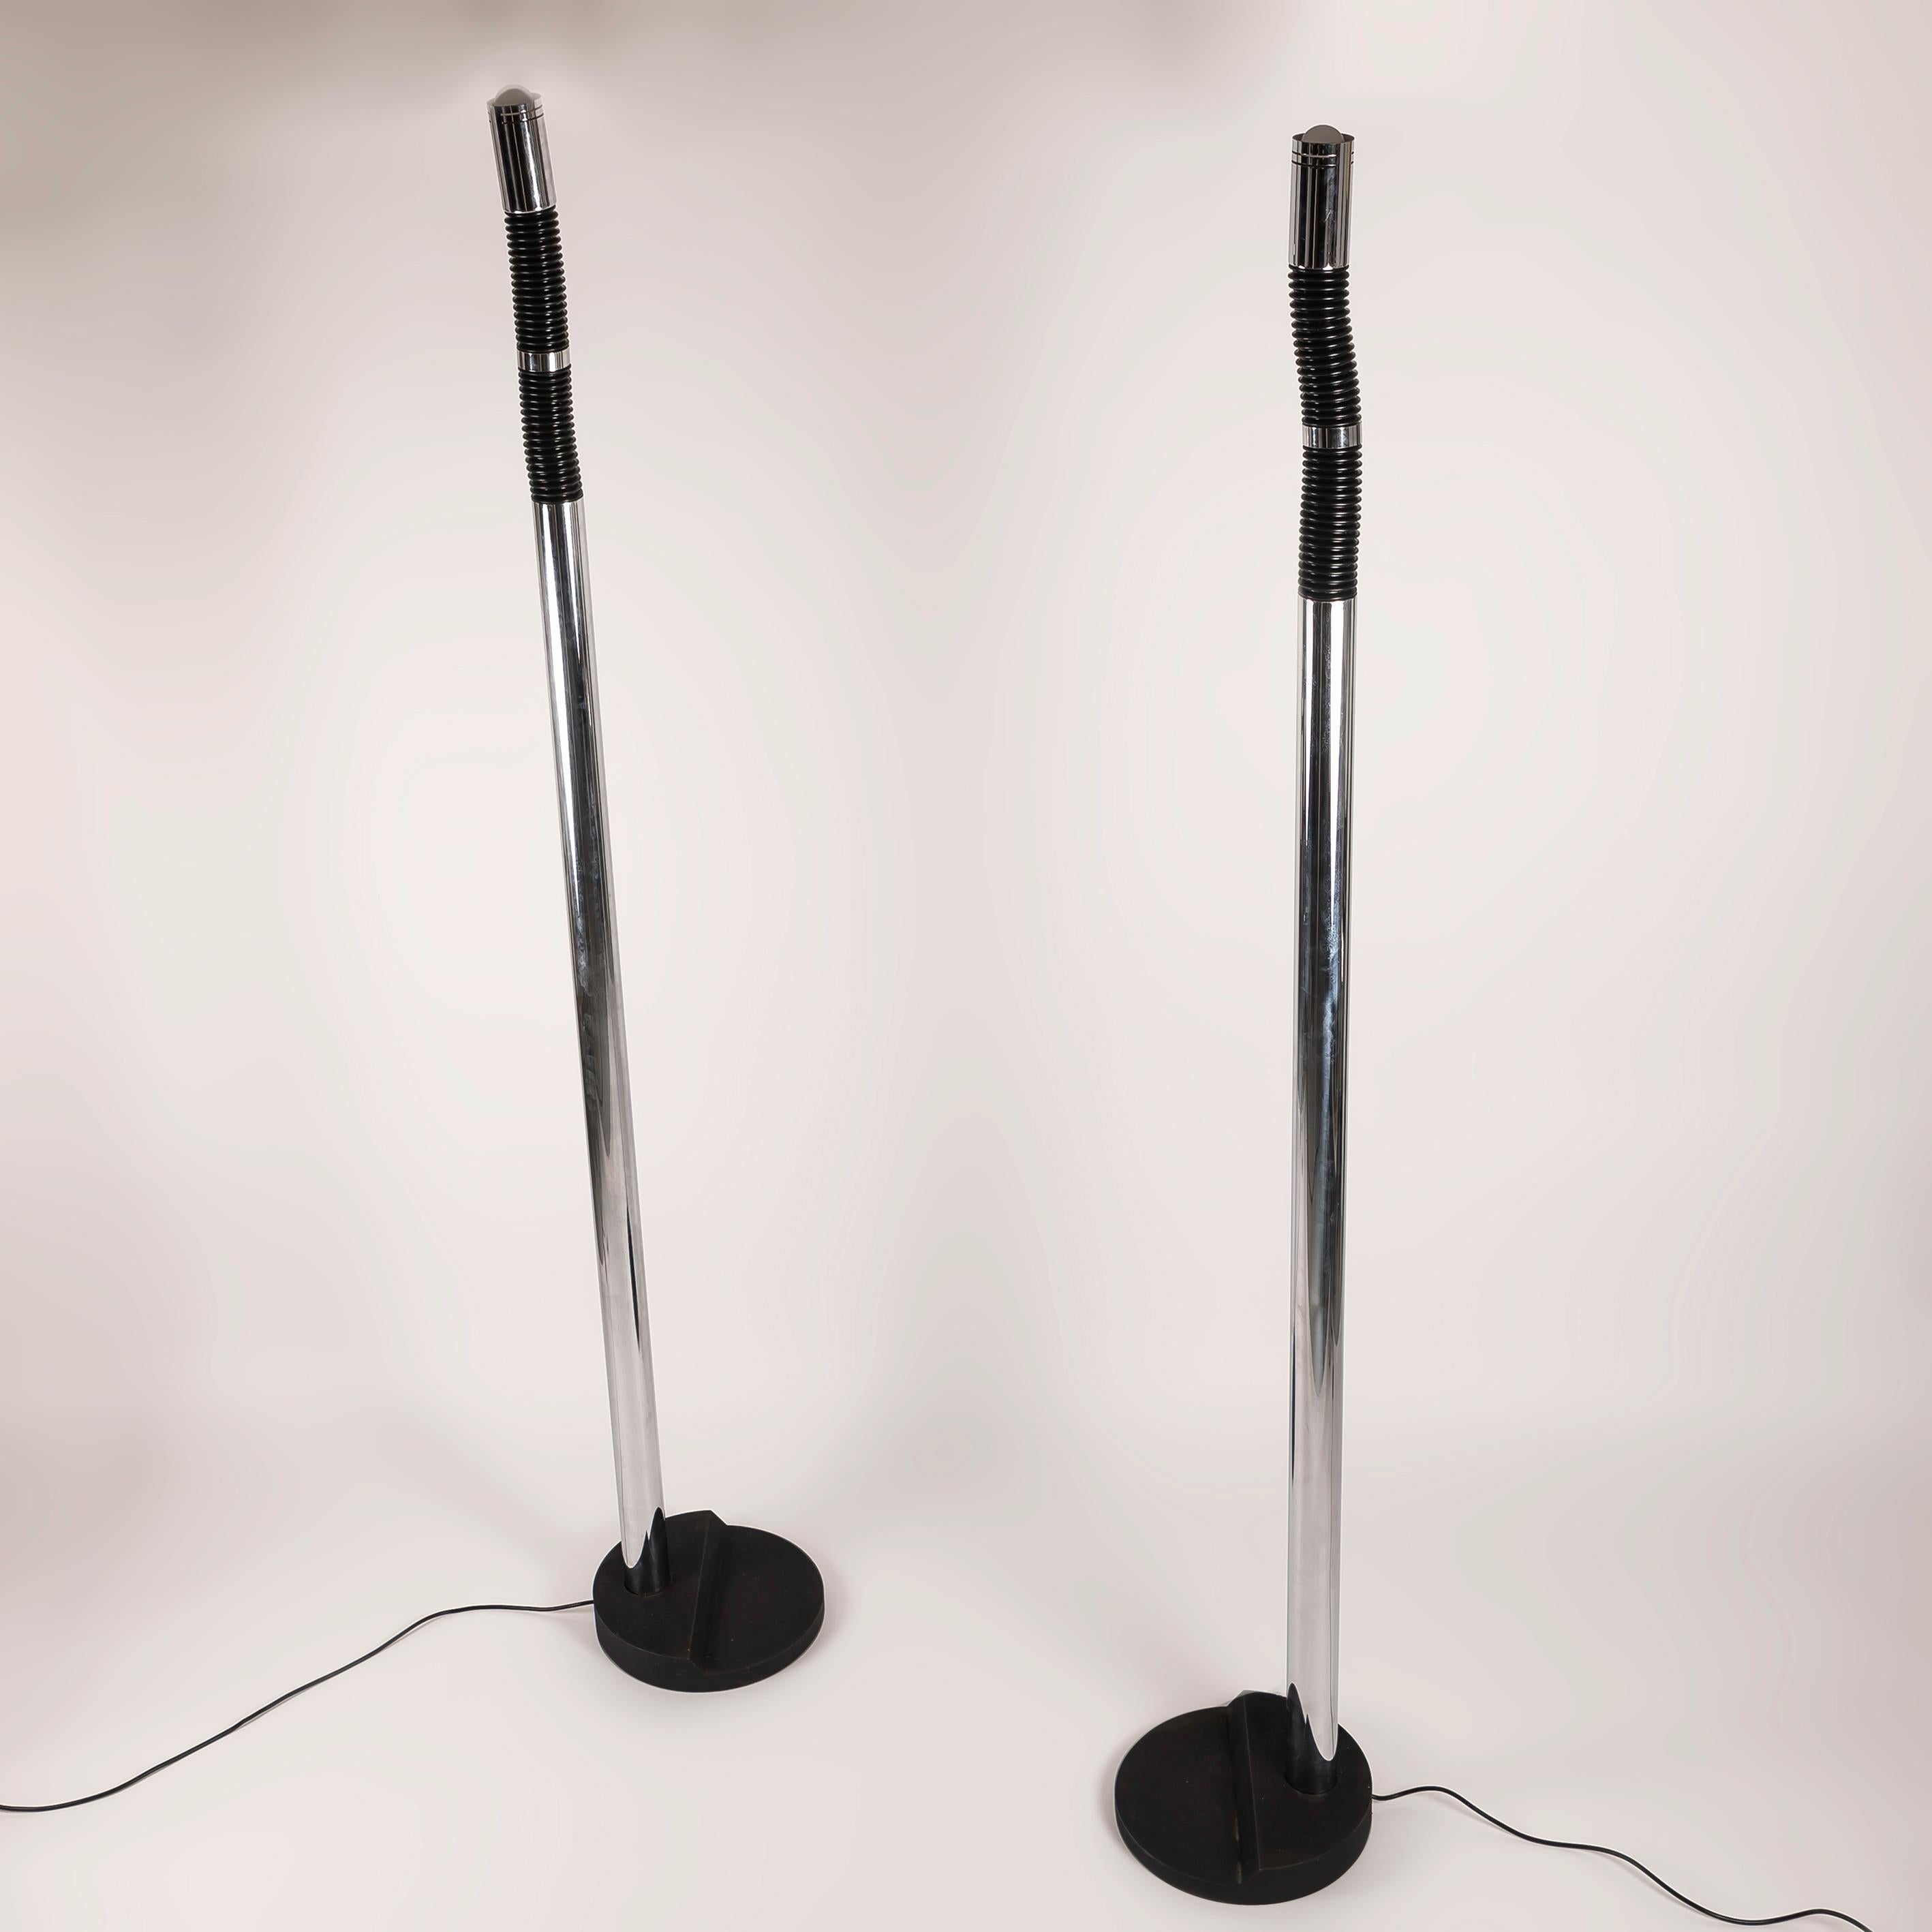 Space Age Italian Floor Lamps in Lacquered Iron and Chromed Metal, 1970s For Sale 3